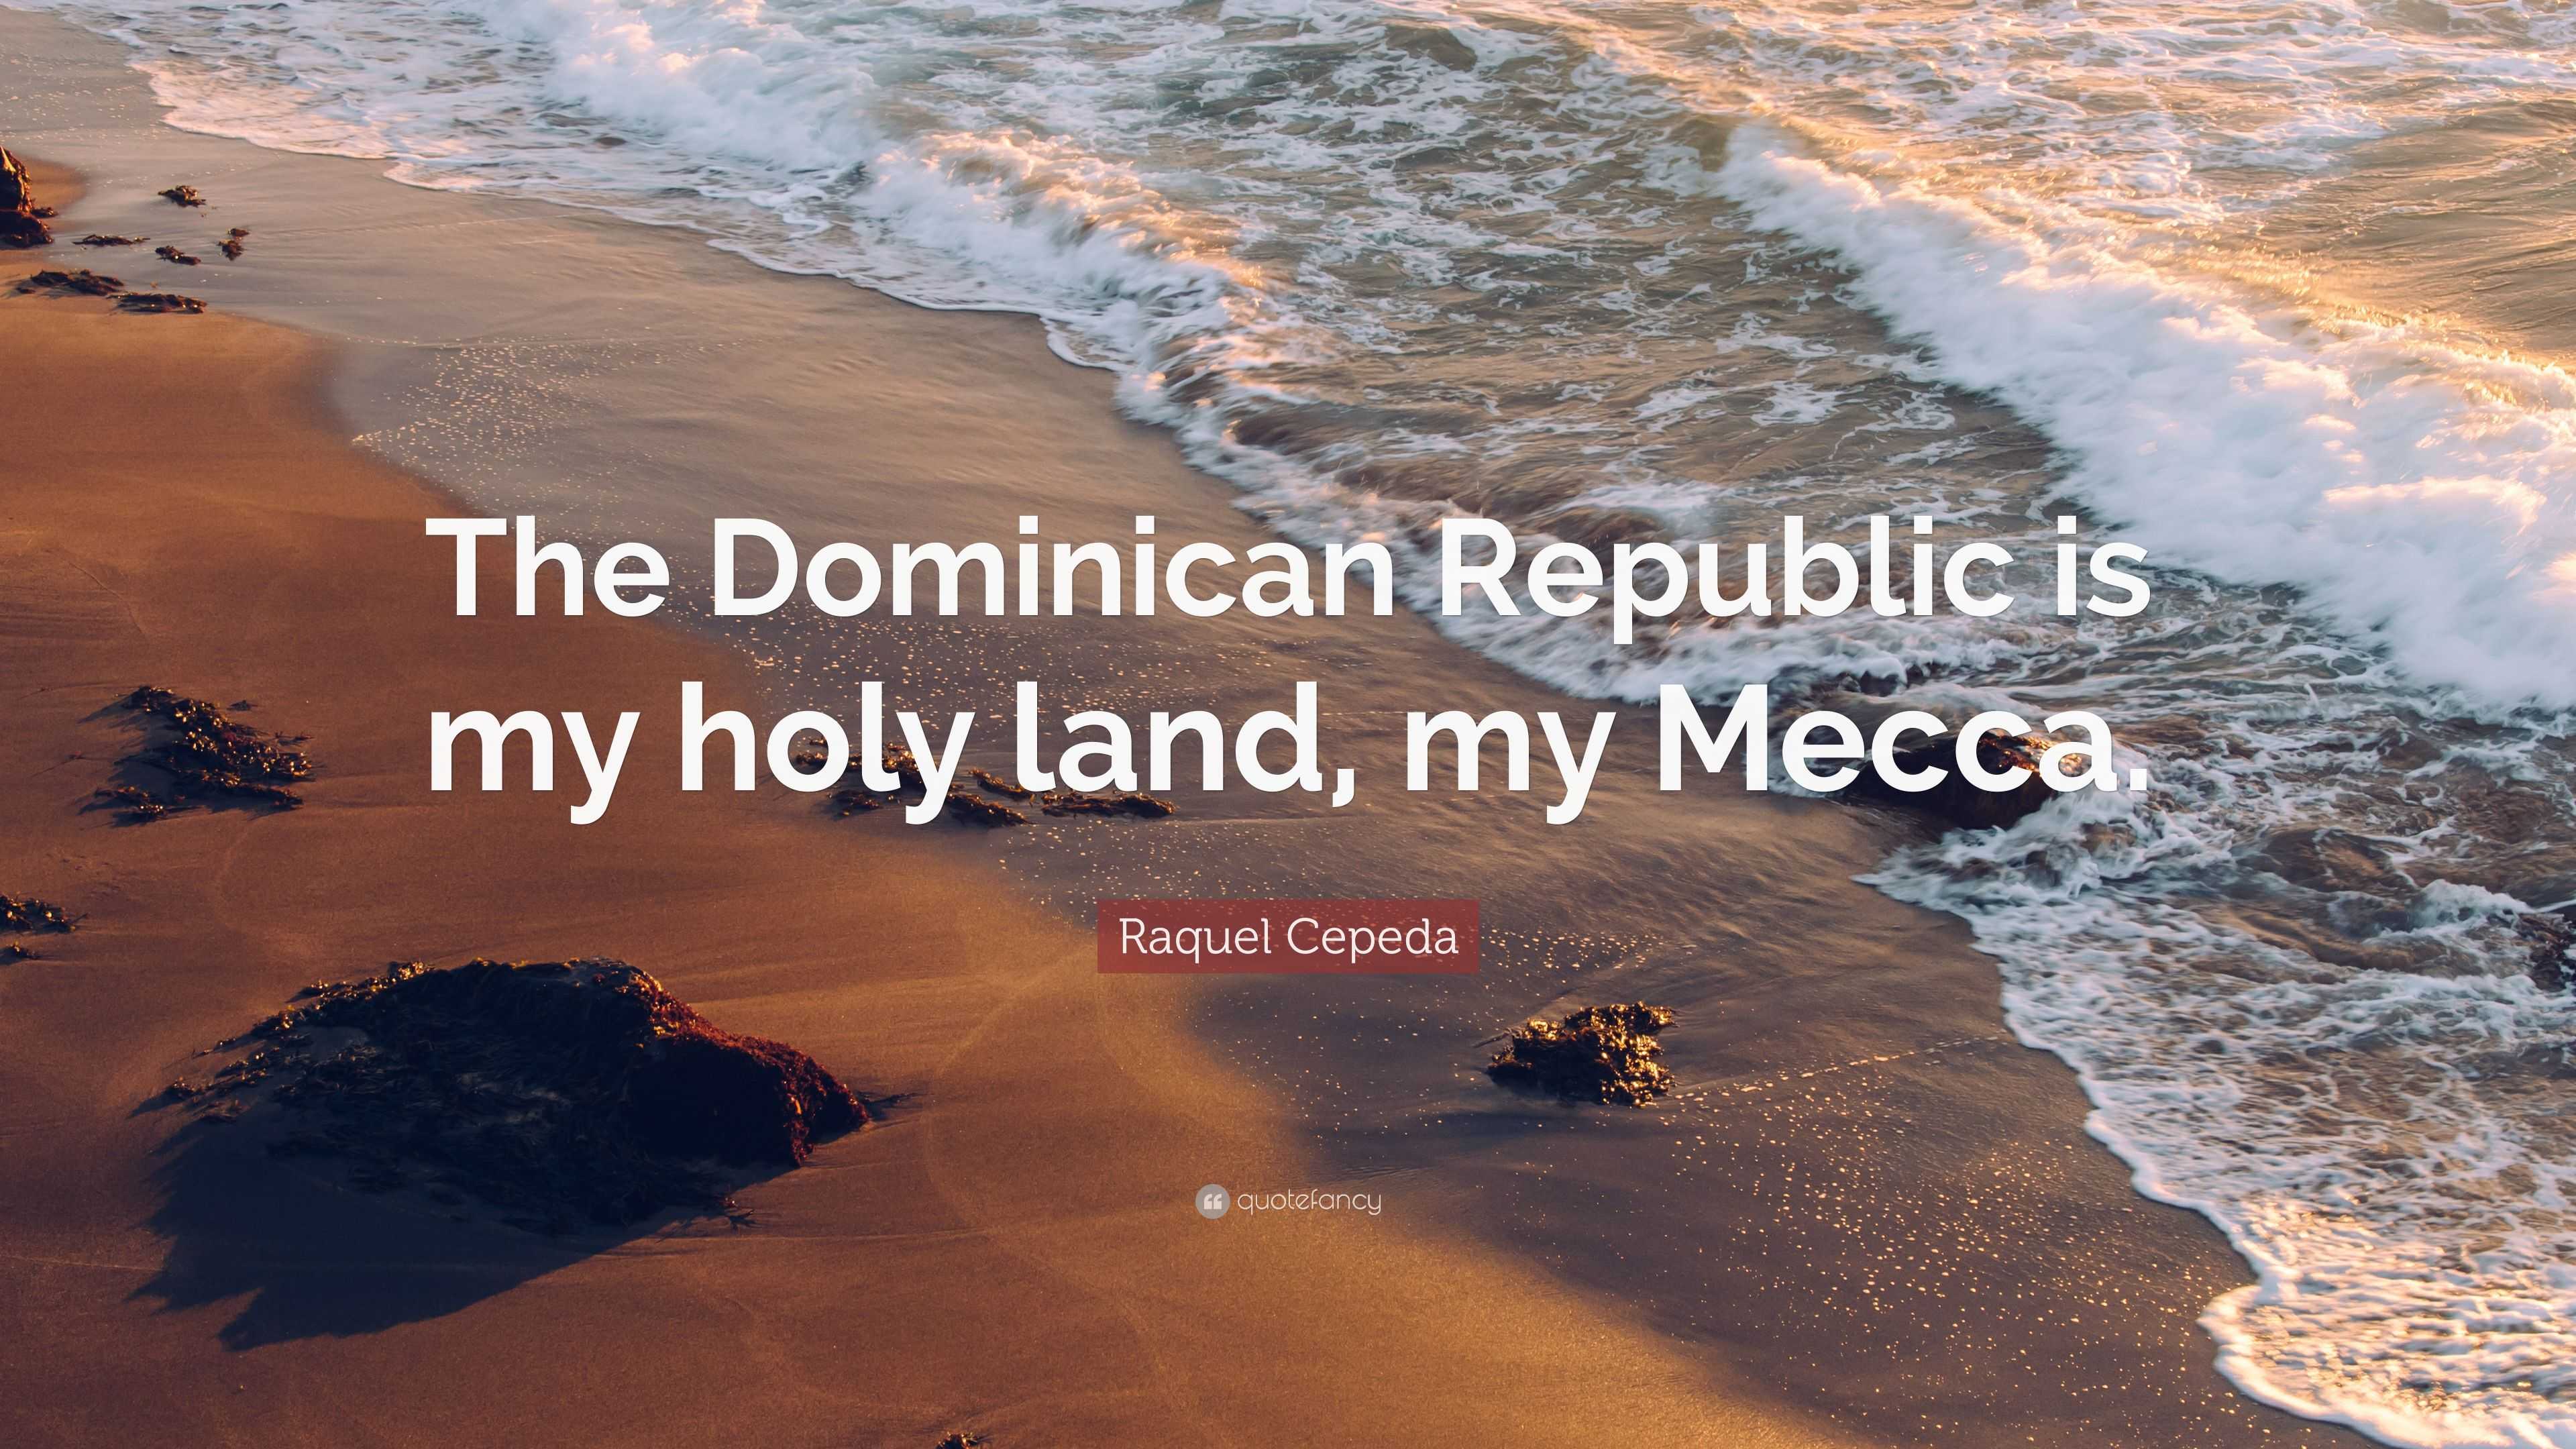 Raquel Cepeda Quote: "The Dominican Republic is my holy land, my Mecca." (7 wallpapers) - Quotefancy